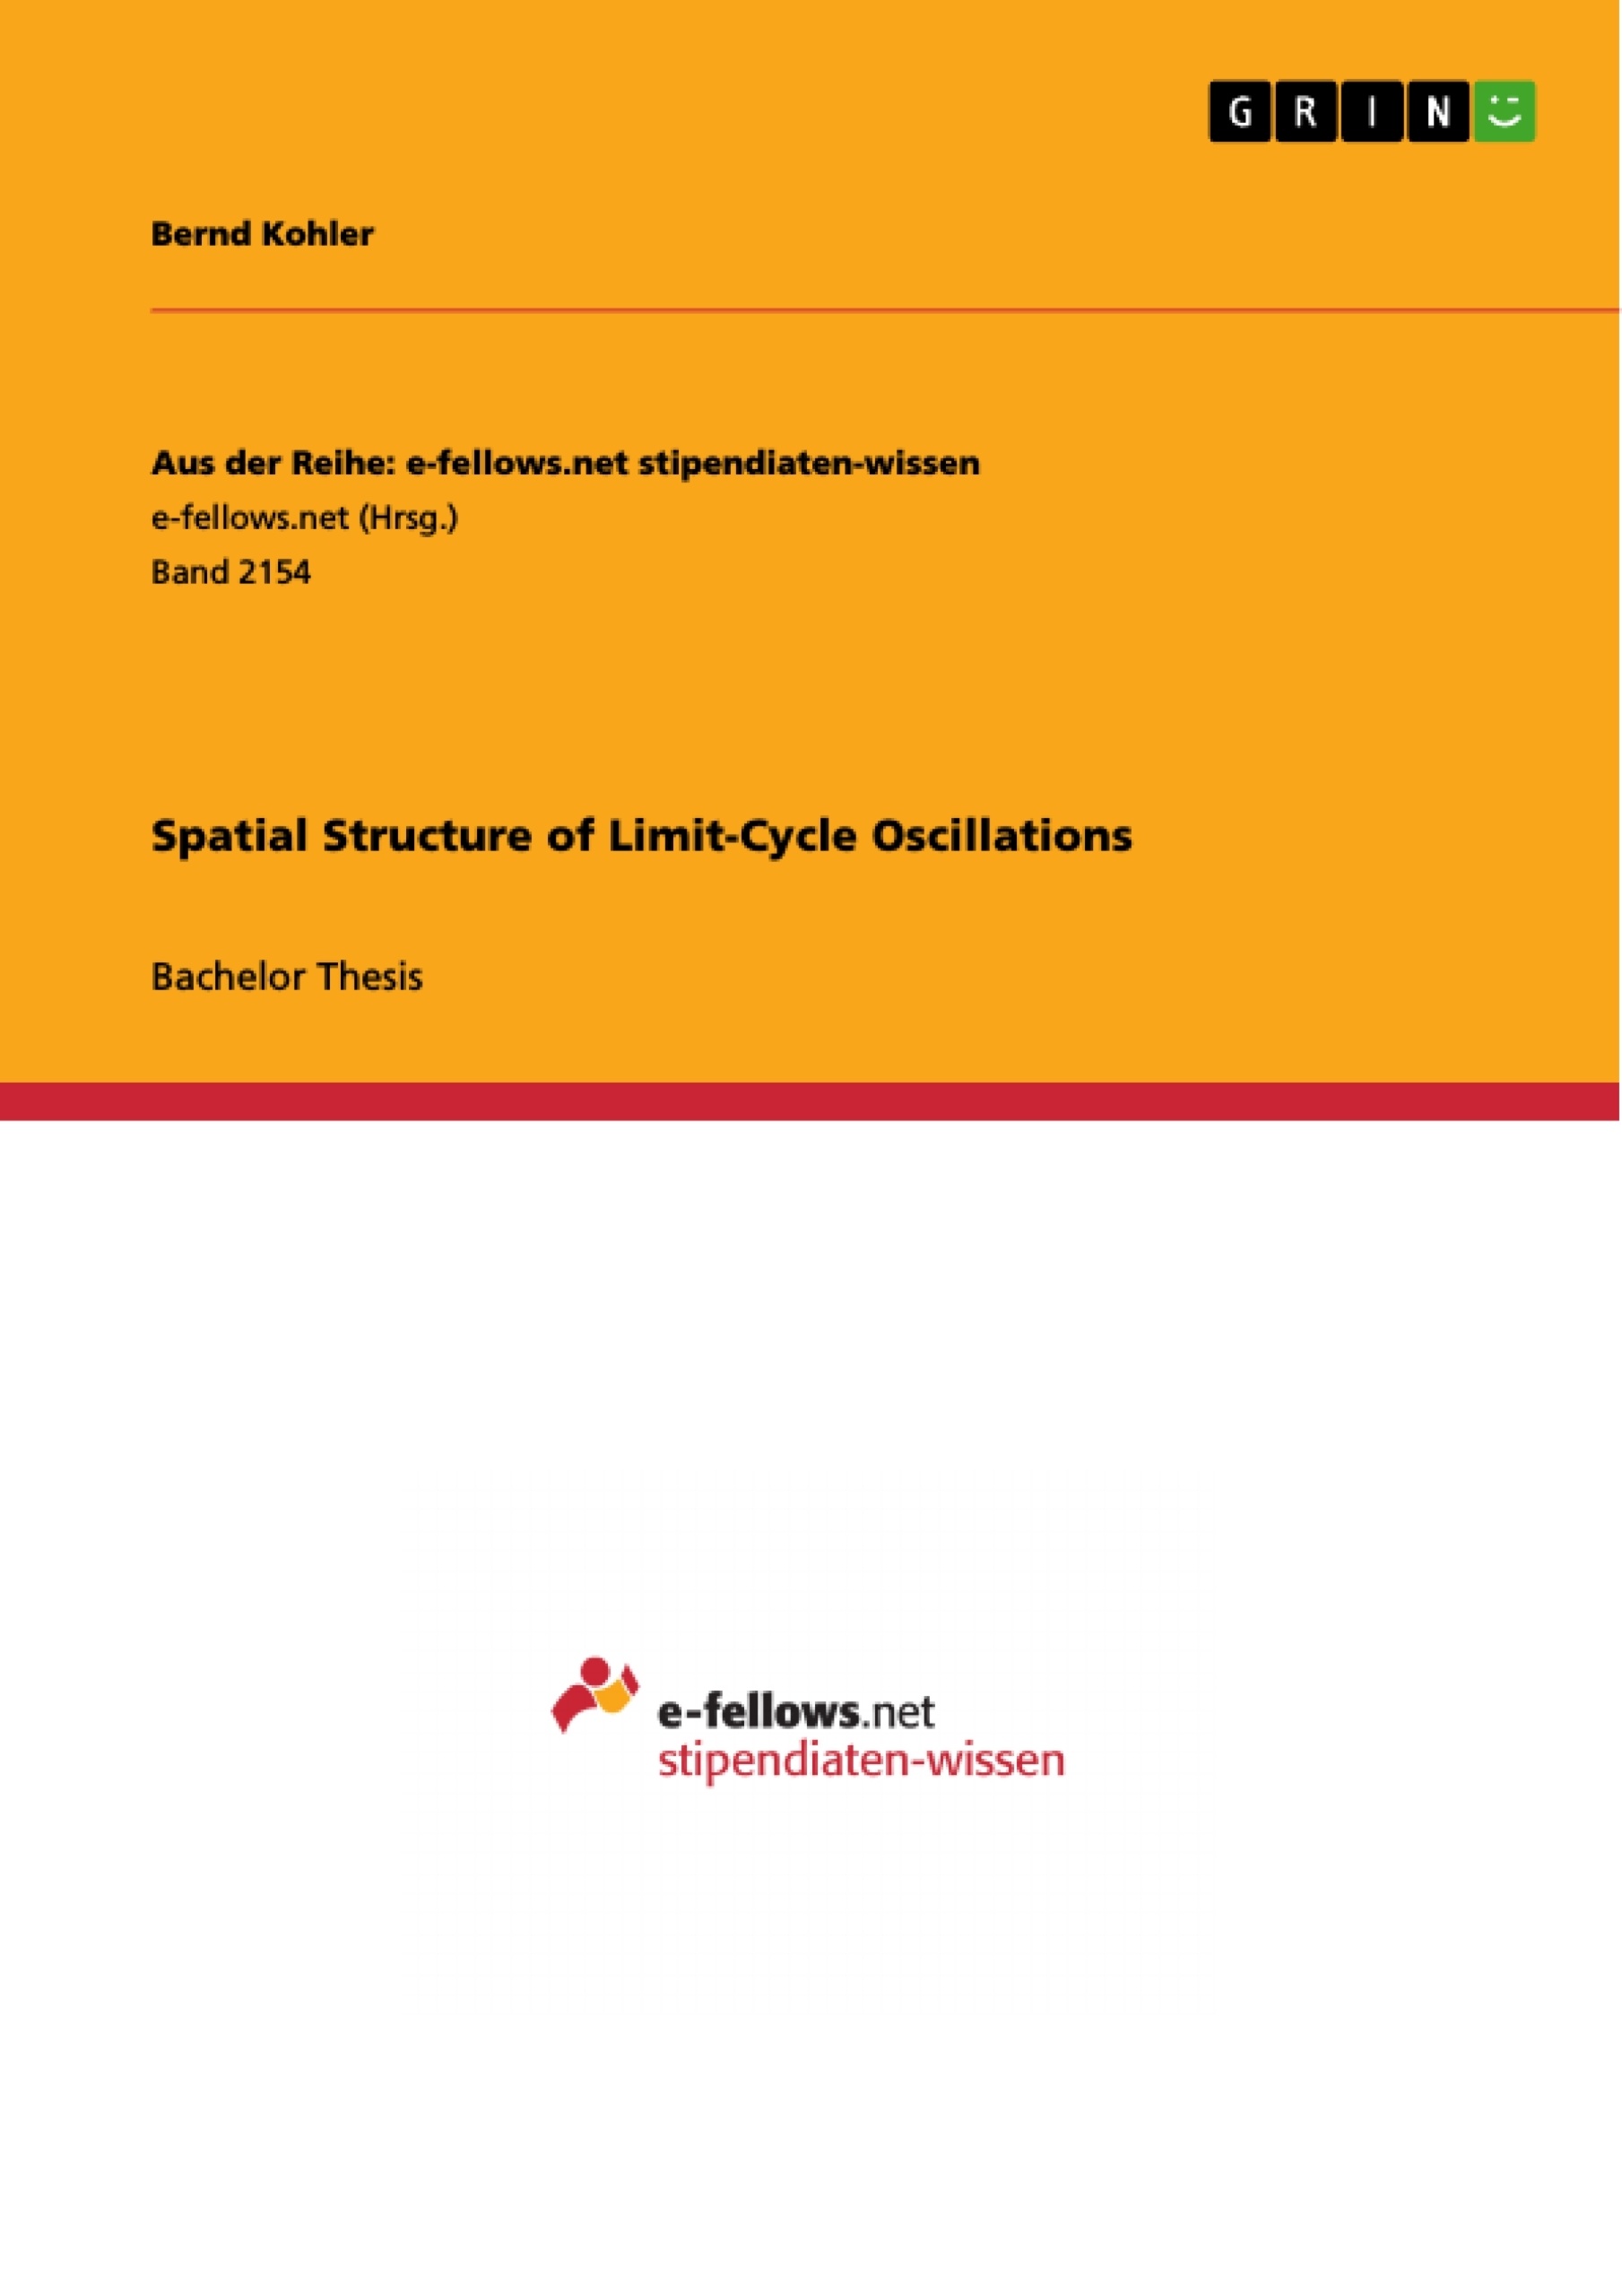 Title: Spatial Structure of Limit-Cycle Oscillations